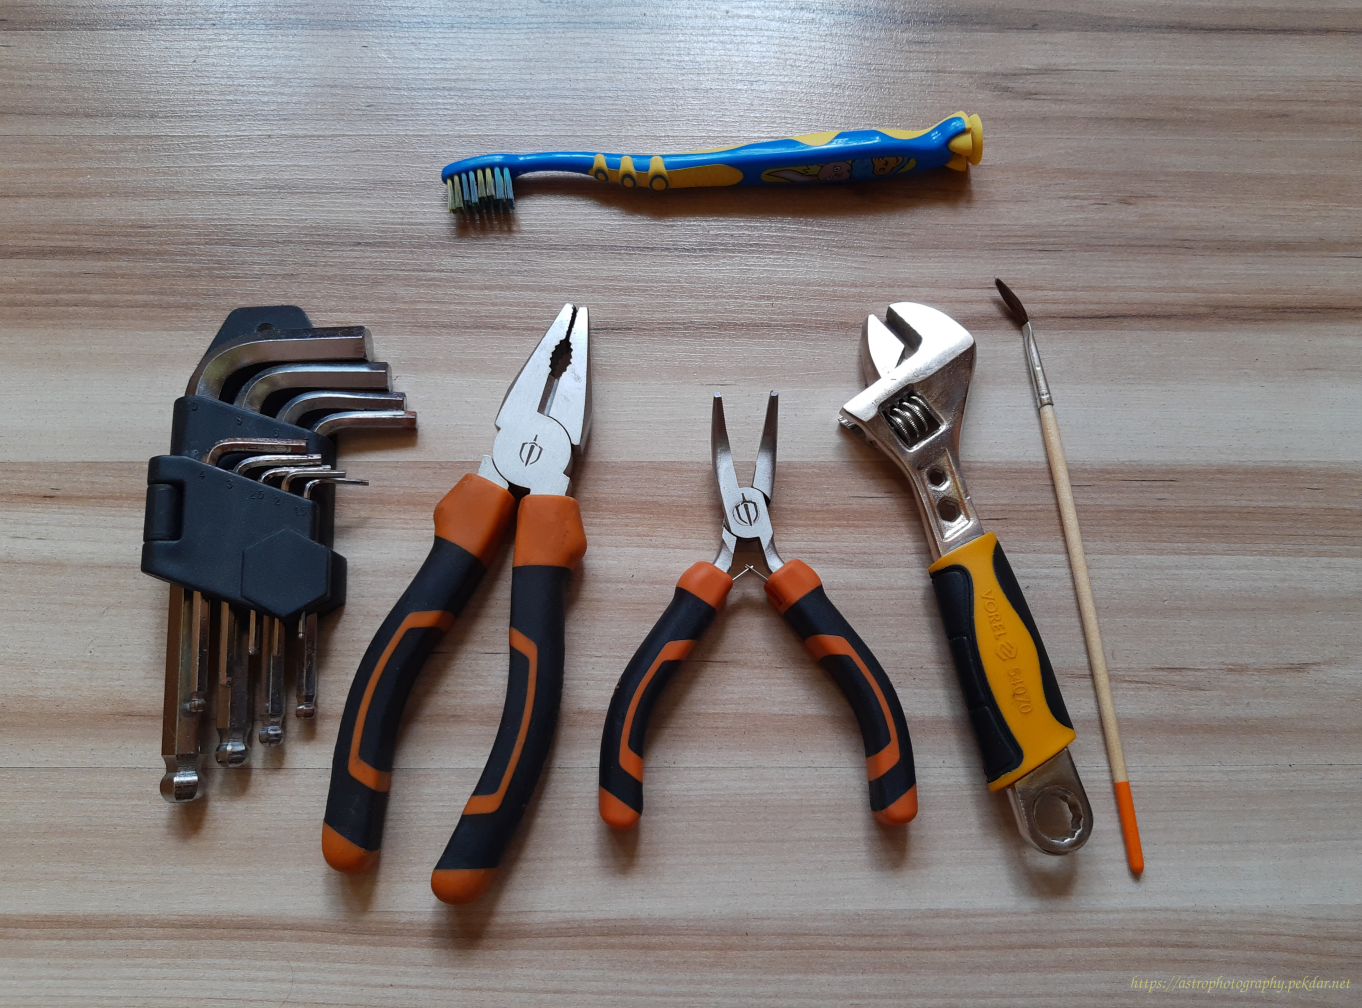 A set of auxiliary tools: